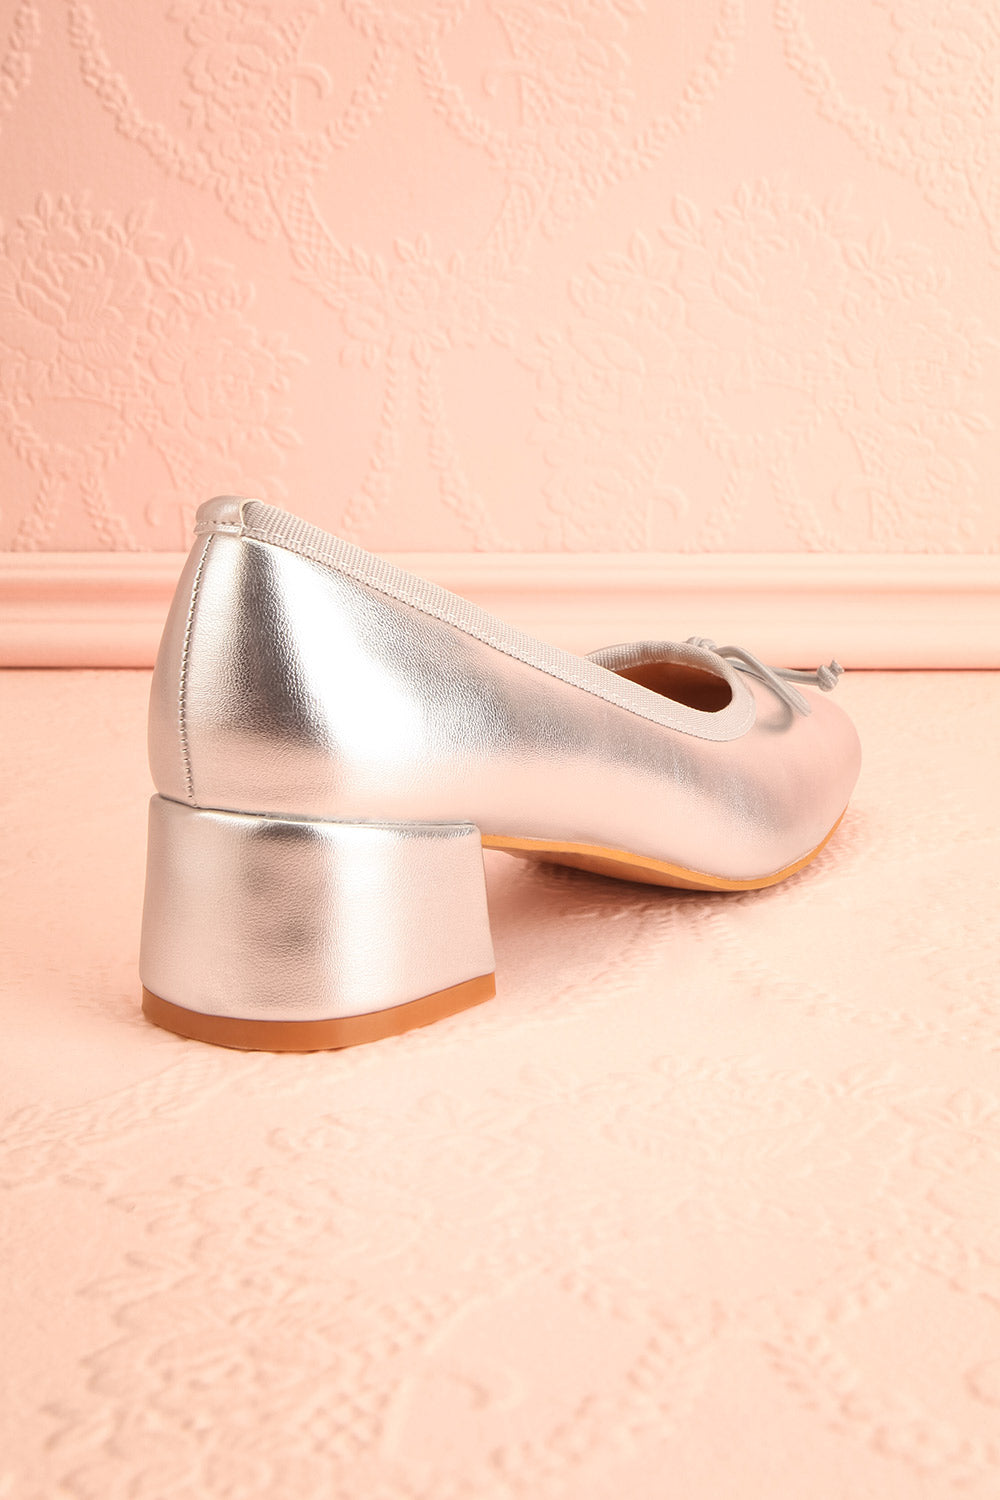 Elyria Silver Heeled Ballerina Shoes w/ Bow | Boutique 1861 back view